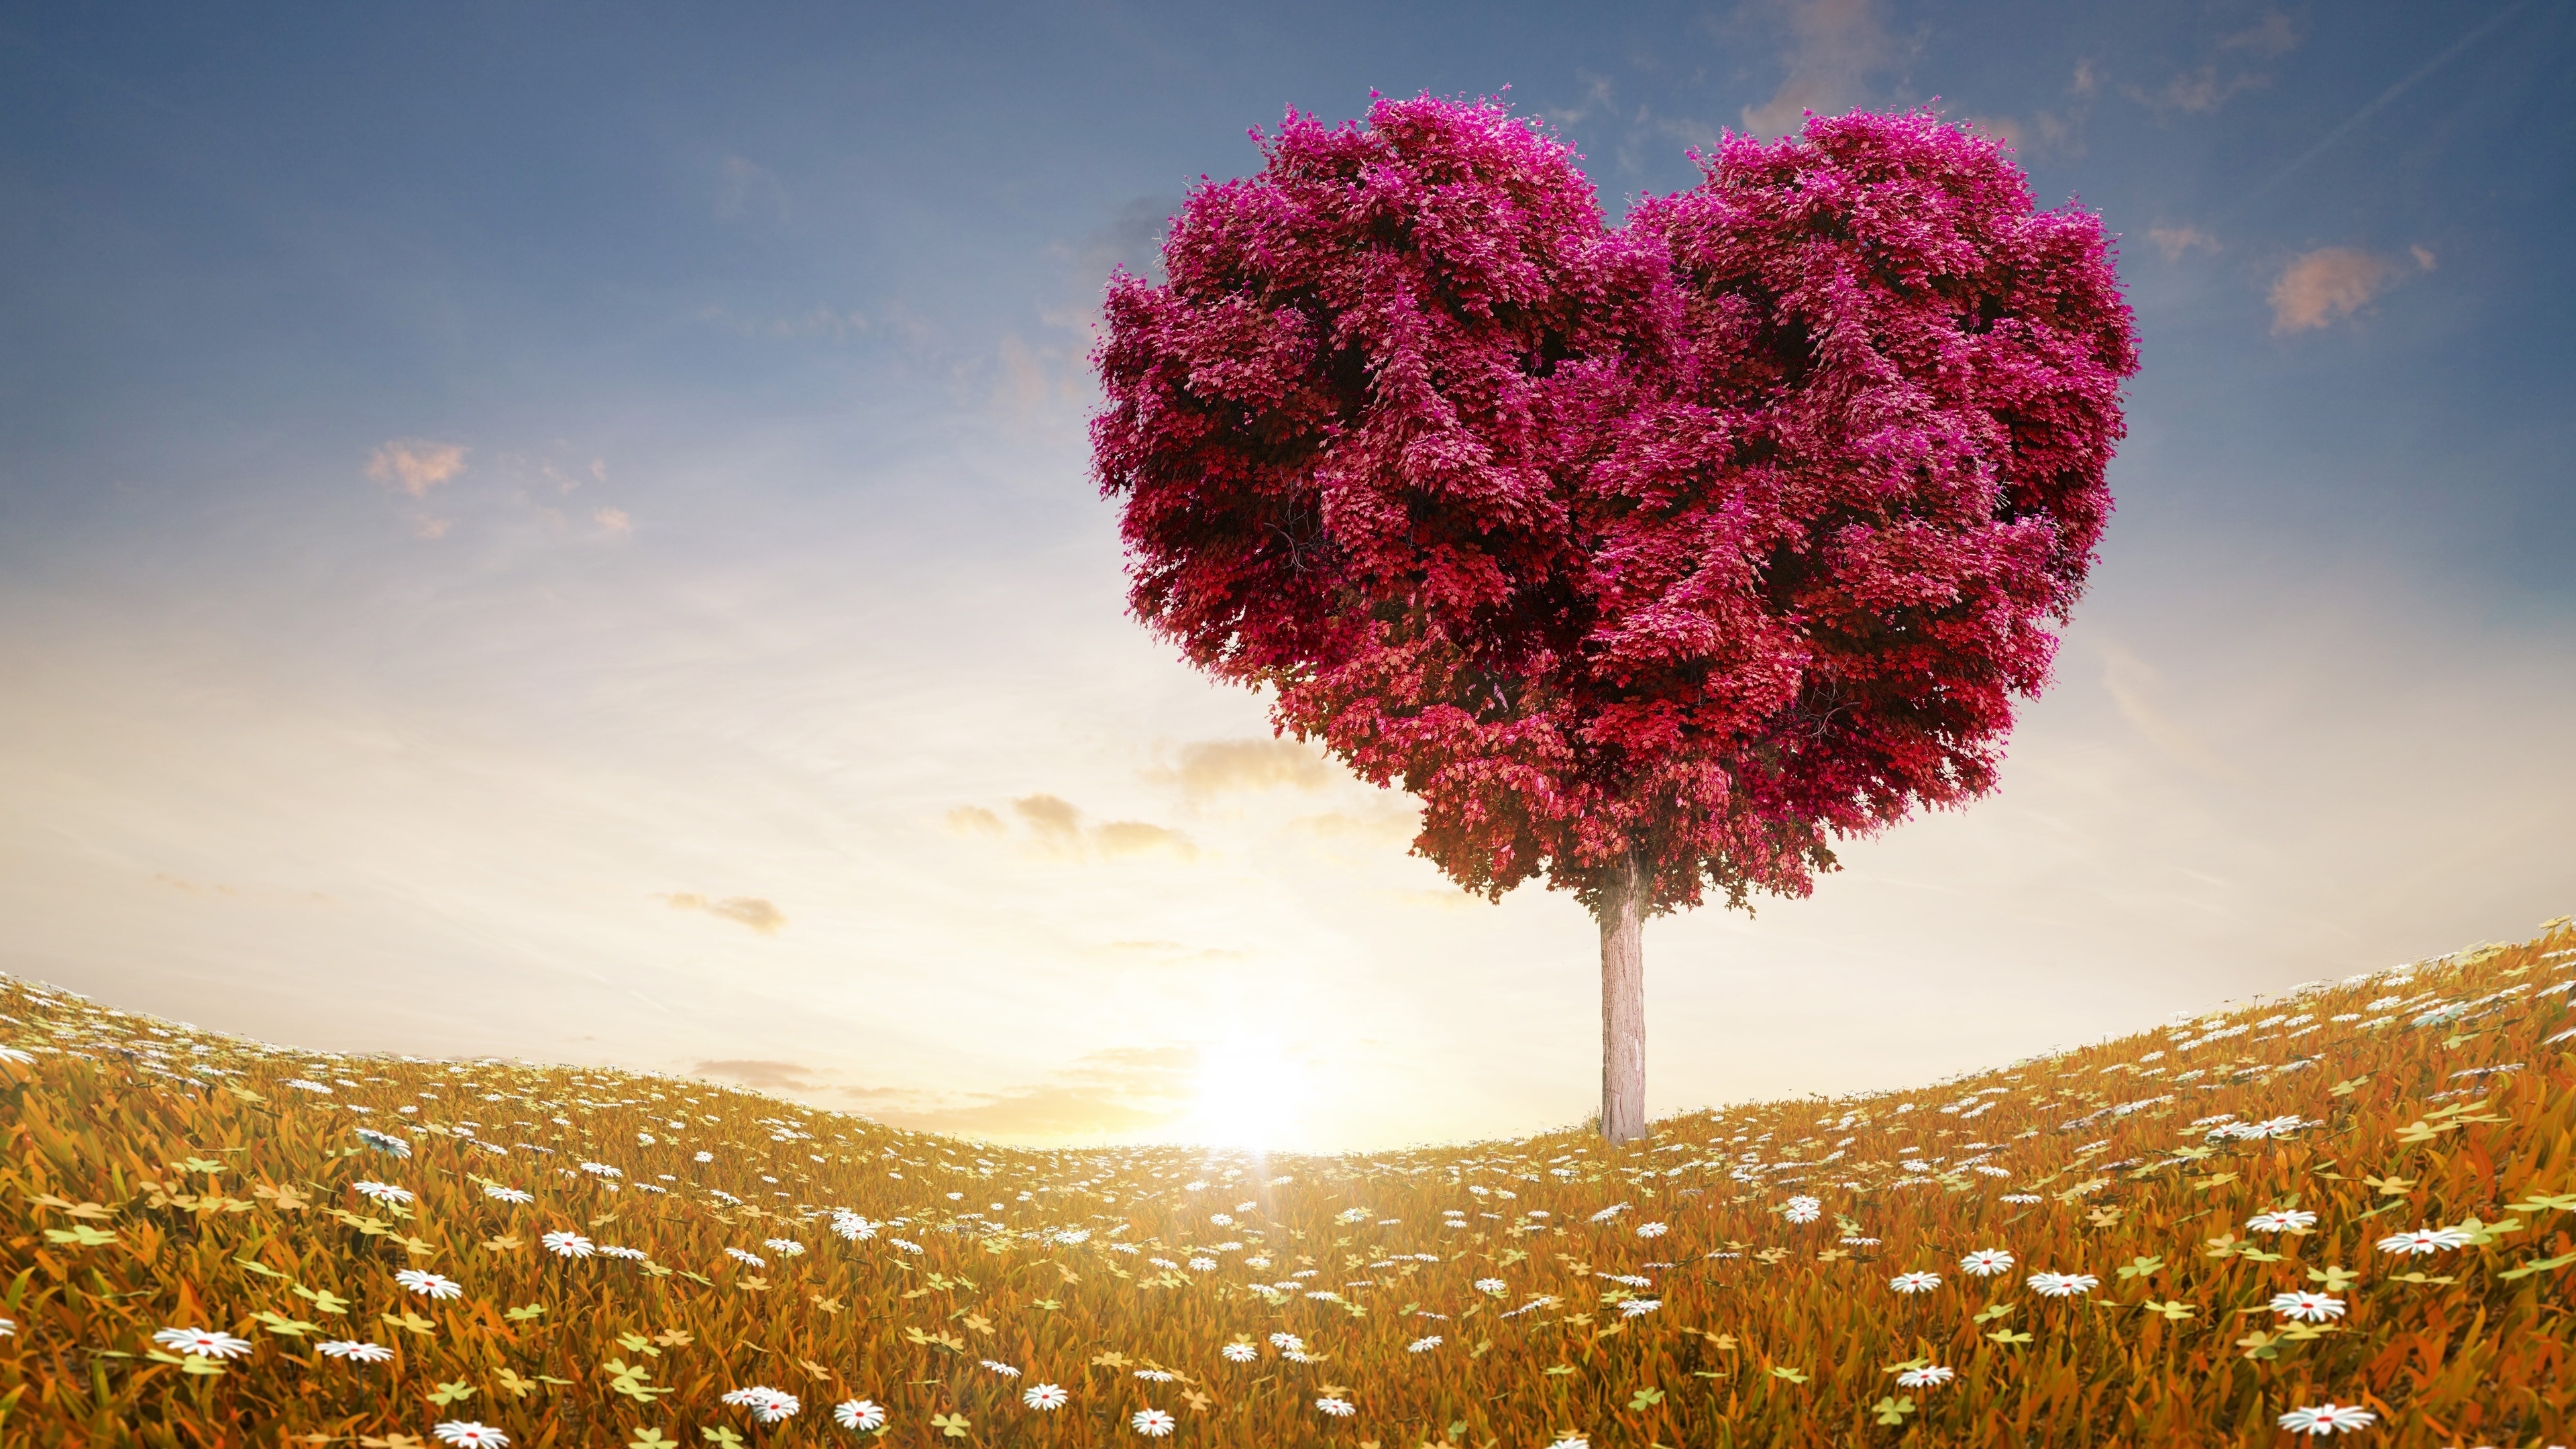 The Love Tree for 3840 x 2160 Ultra HD resolution